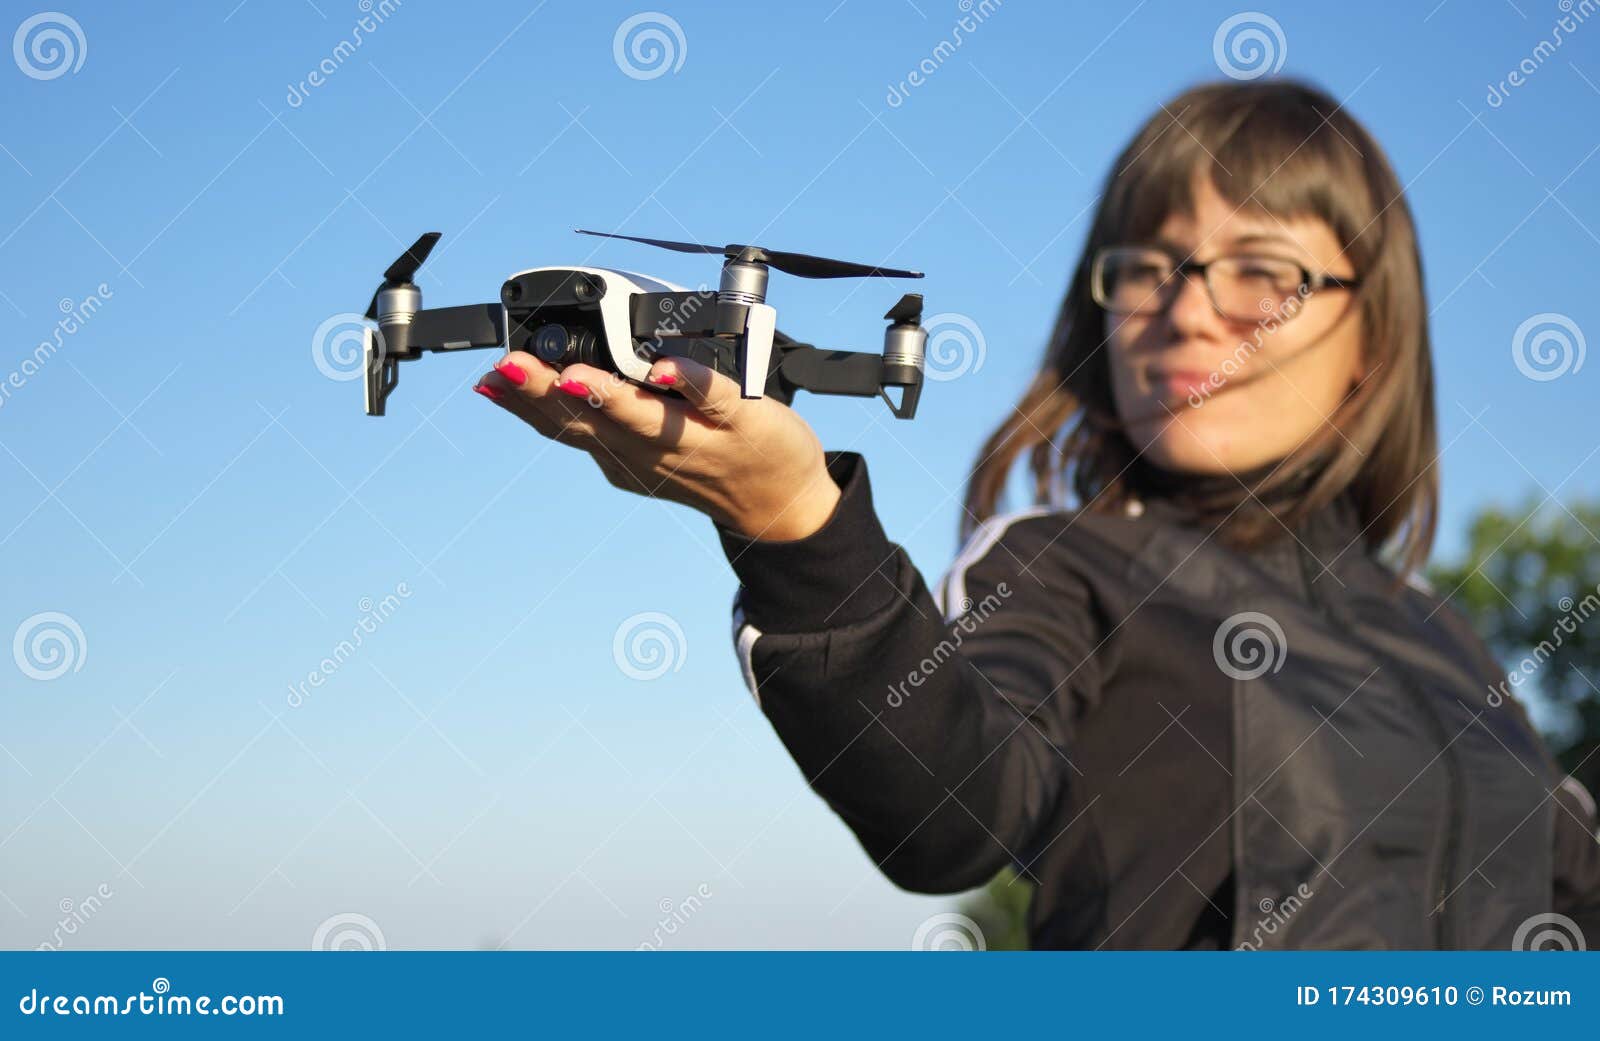 Drone on a woman hand stock photo. Image of model, catch - 174309610